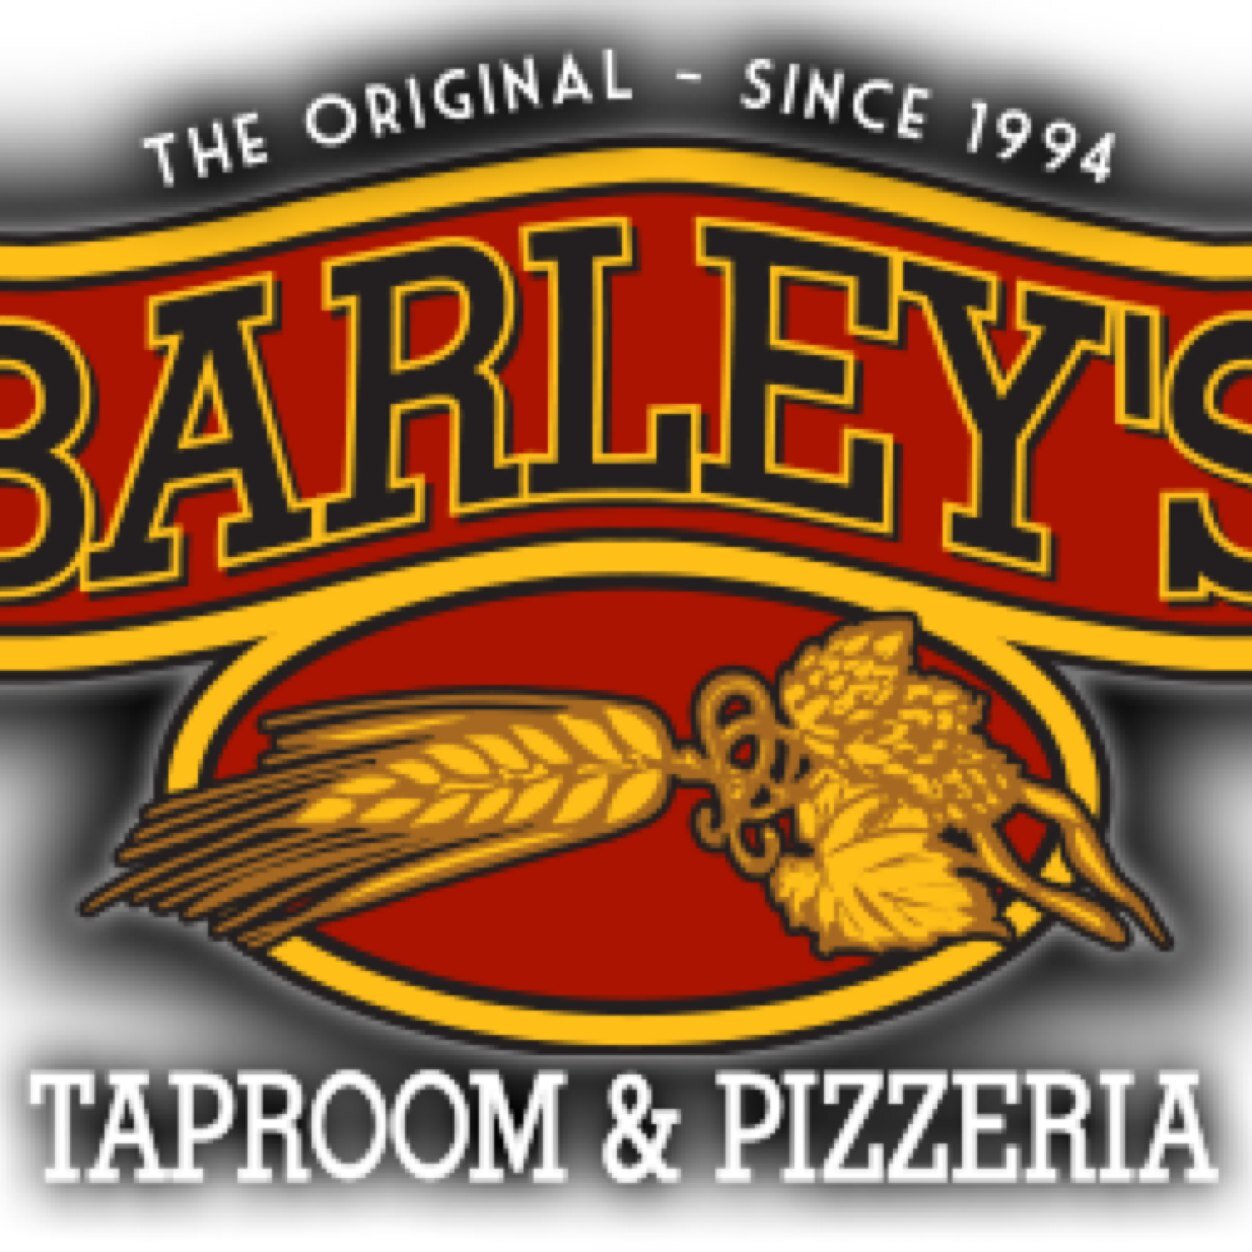 Barley's Taproom and Pizzeria, downtown Asheville. Great pizza, the best beer selection, pool tables, music and good times! The Mothership!